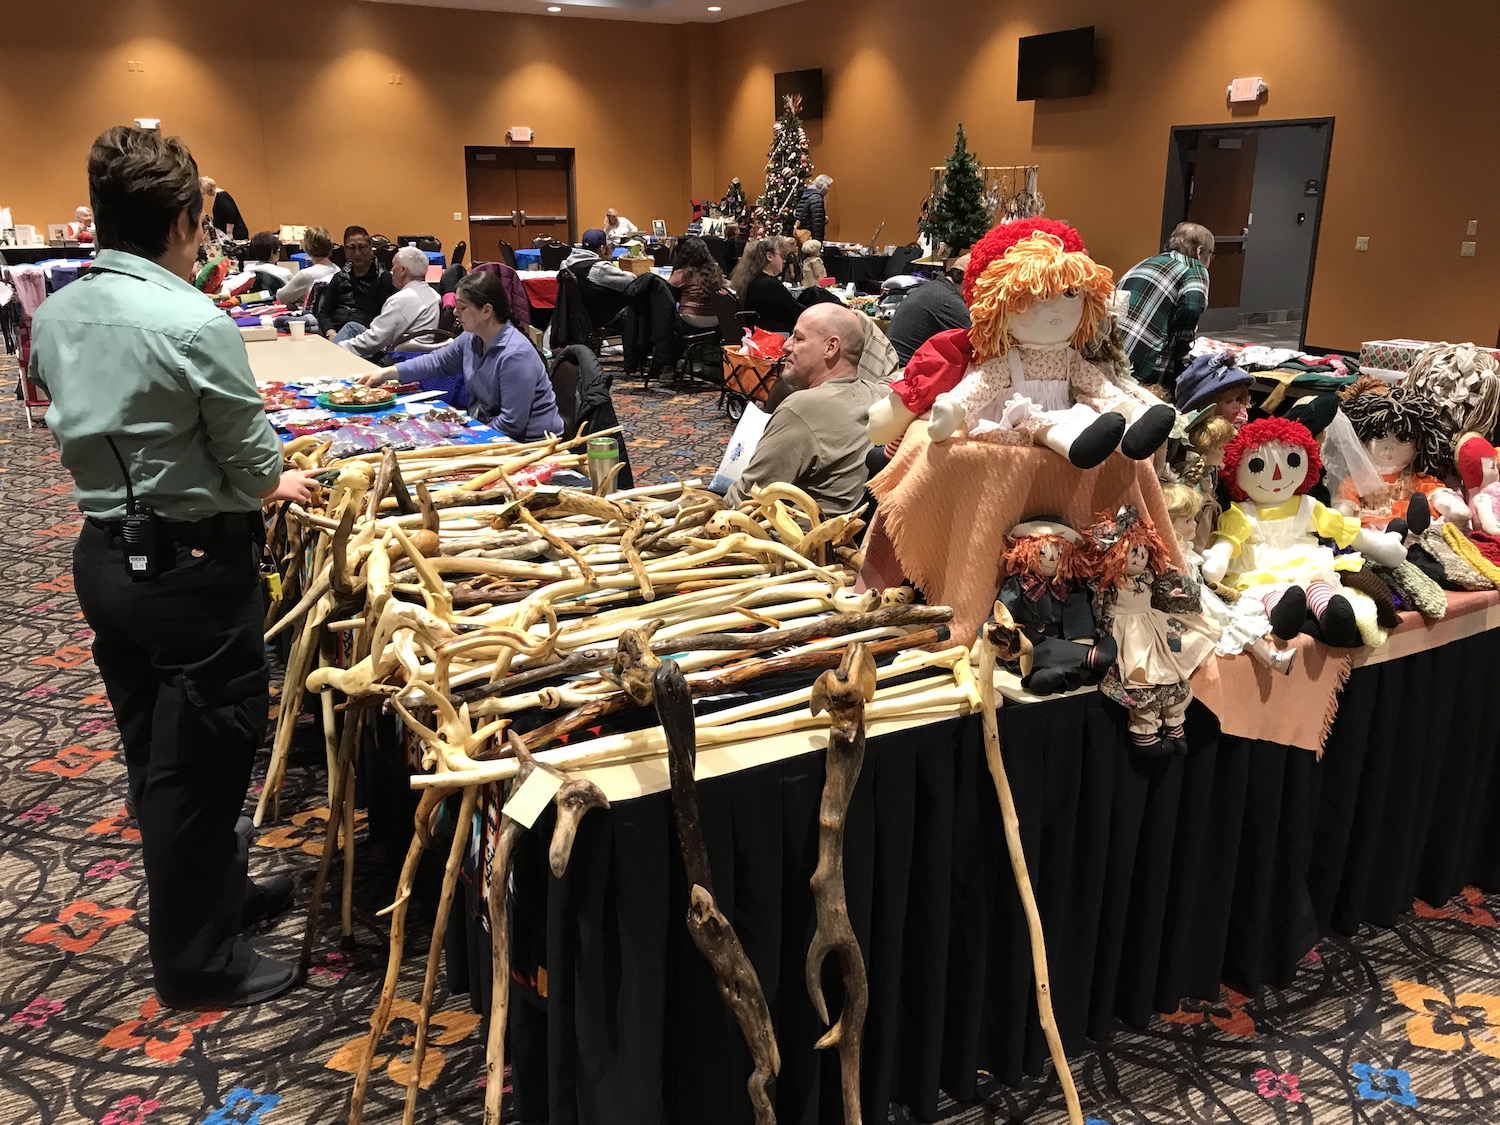 Grand Portage hosts regional crafters at Holiday Craft Fair Boreal